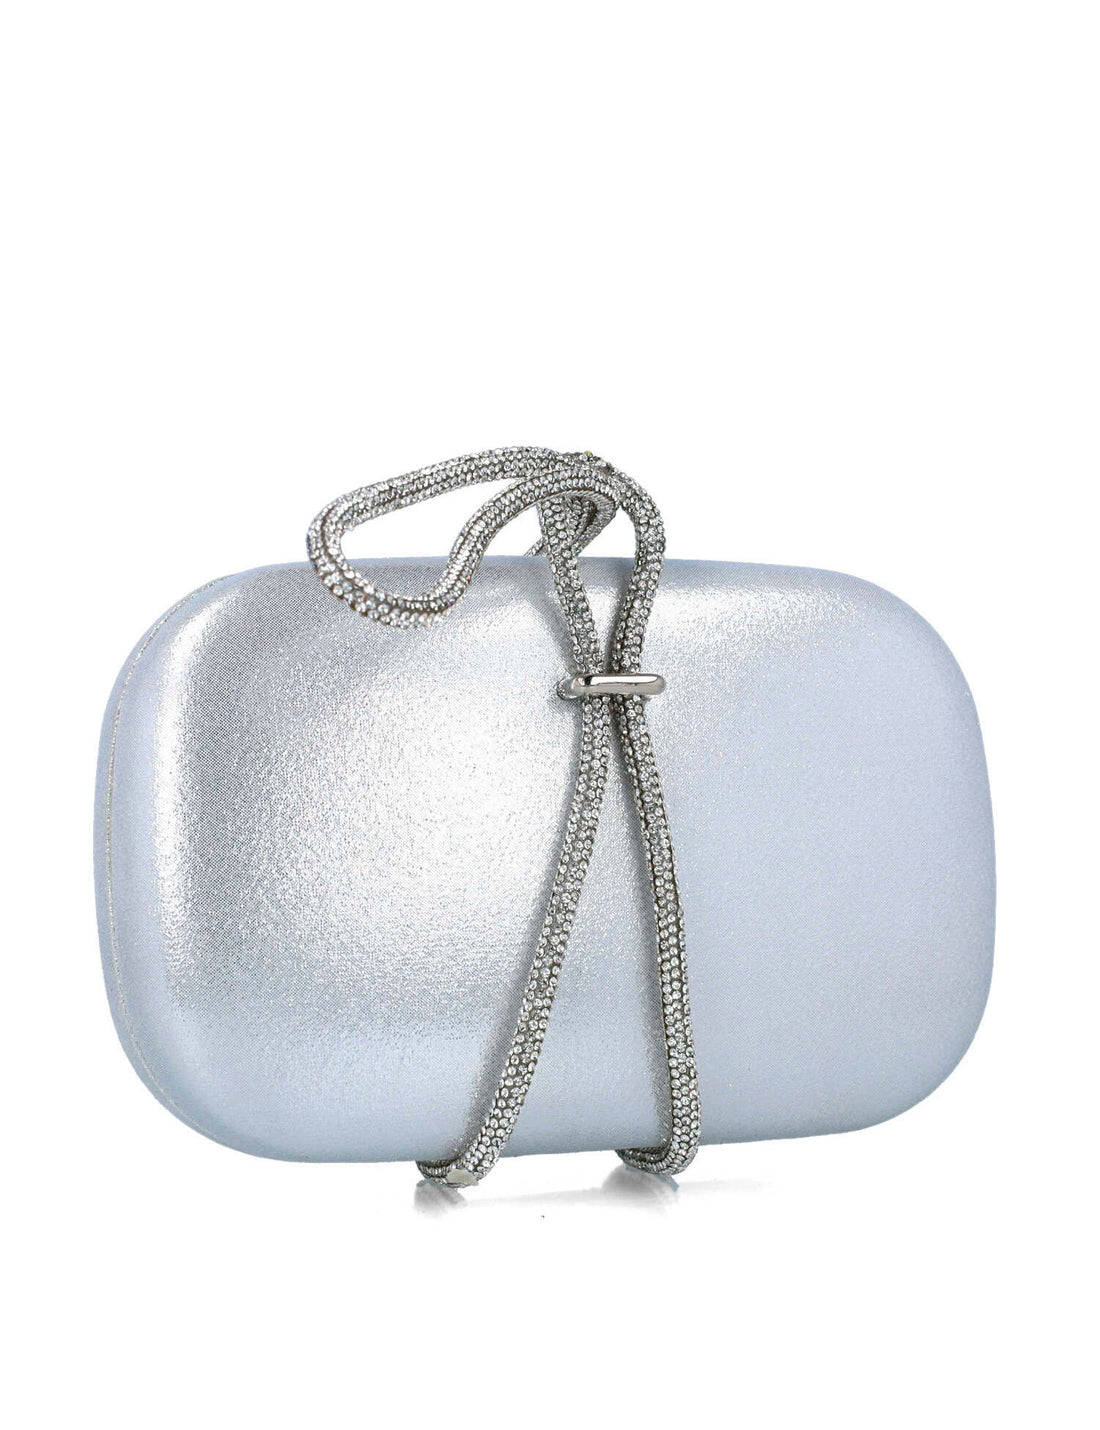 Silver Clutch With Embellished Hand Strap_85499_09_02